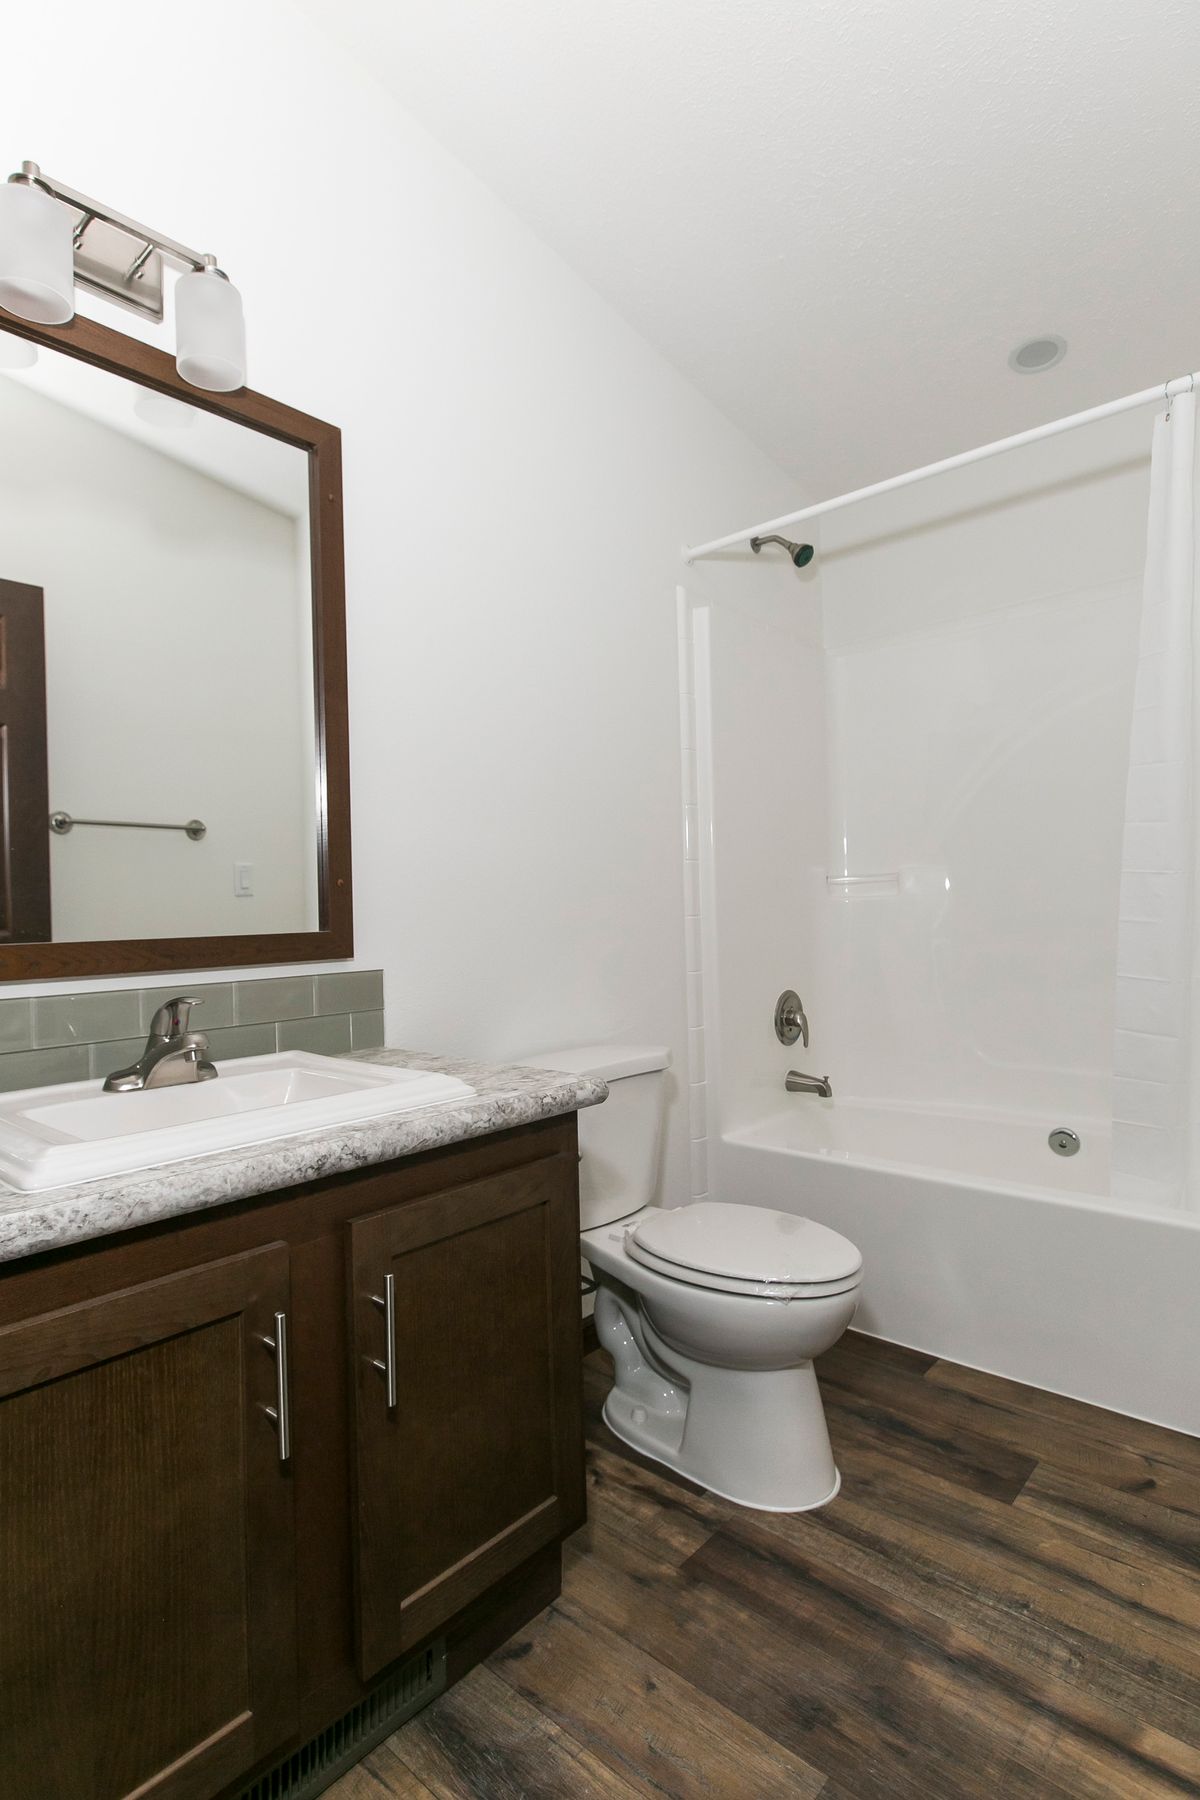 The FREEDOM 405 Guest Bathroom. This Manufactured Mobile Home features 3 bedrooms and 2 baths.